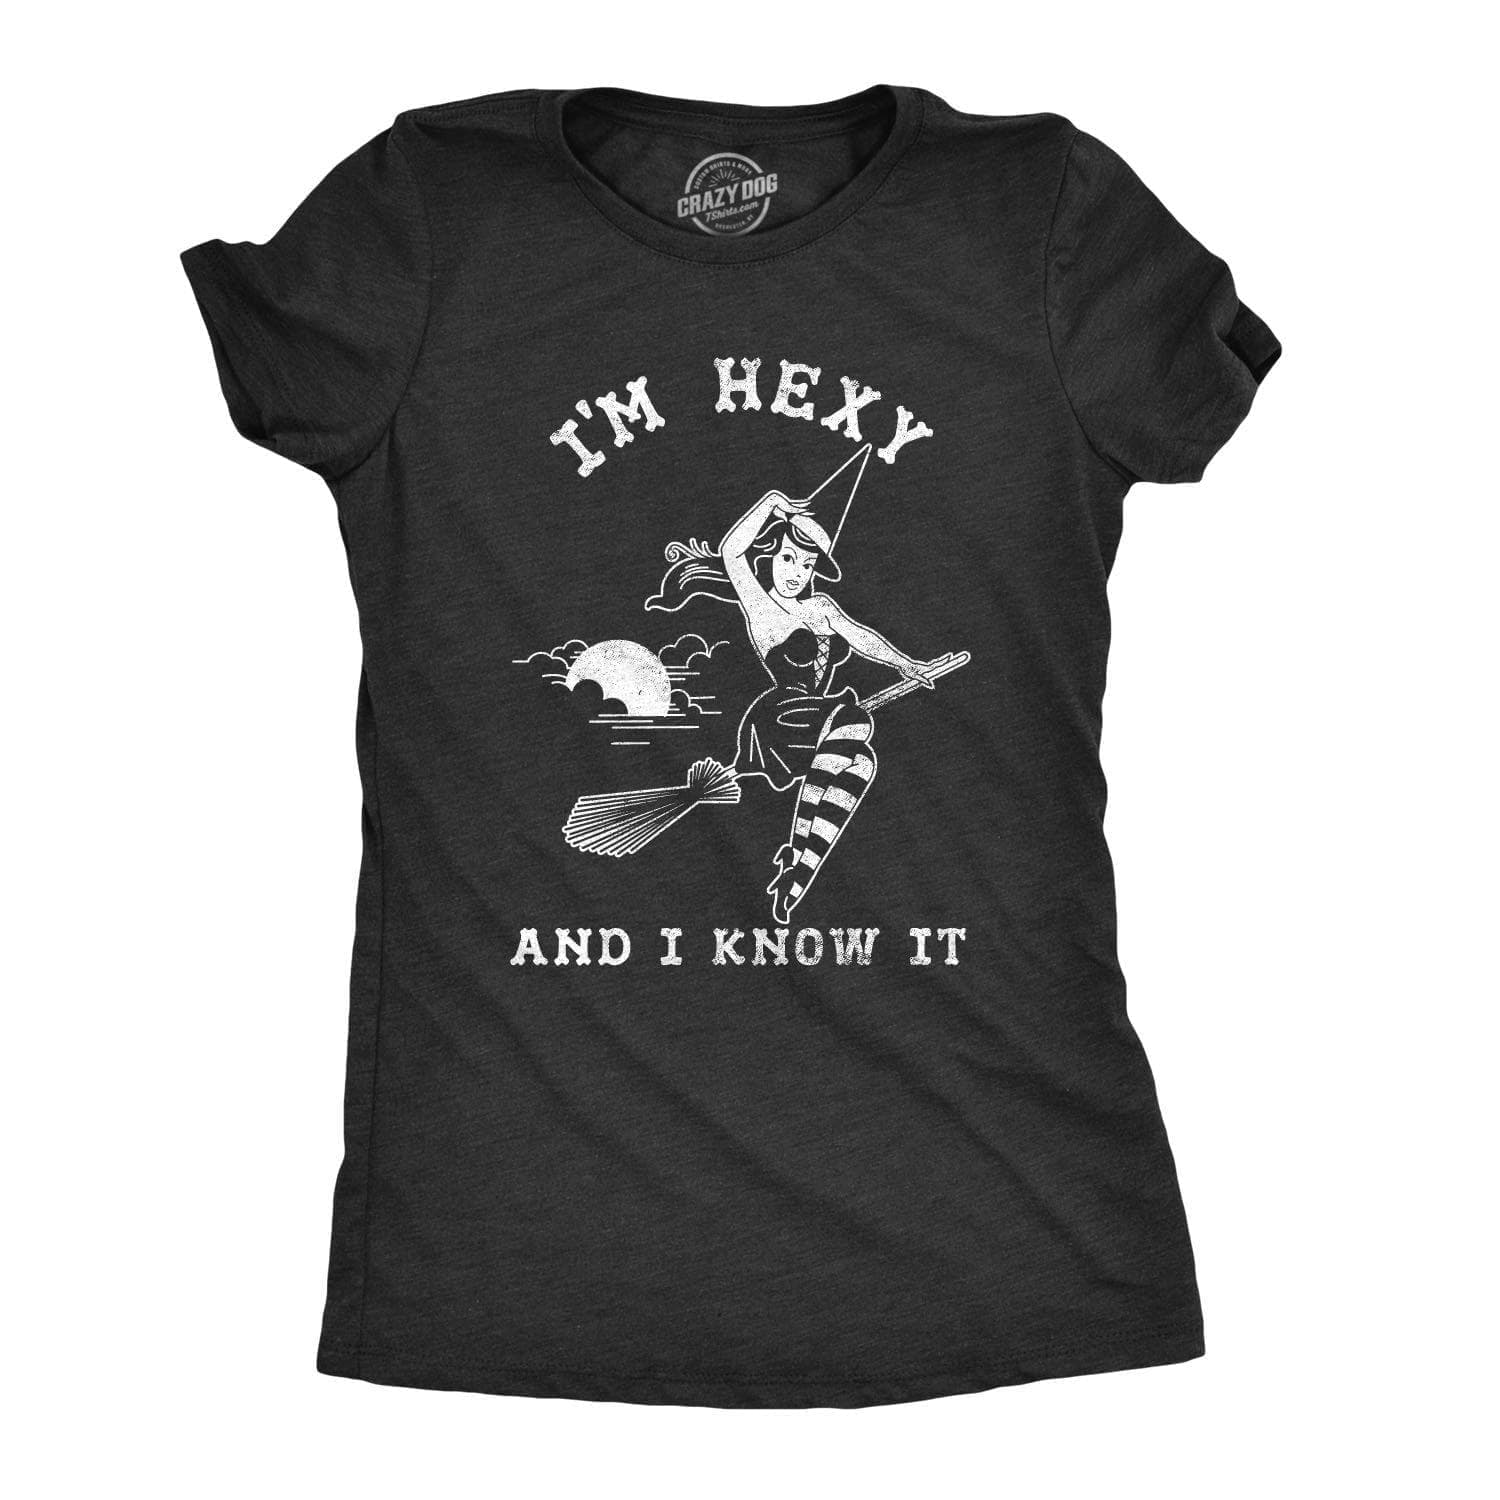 I'm Hexy And I Know It Women's Tshirt - Crazy Dog T-Shirts